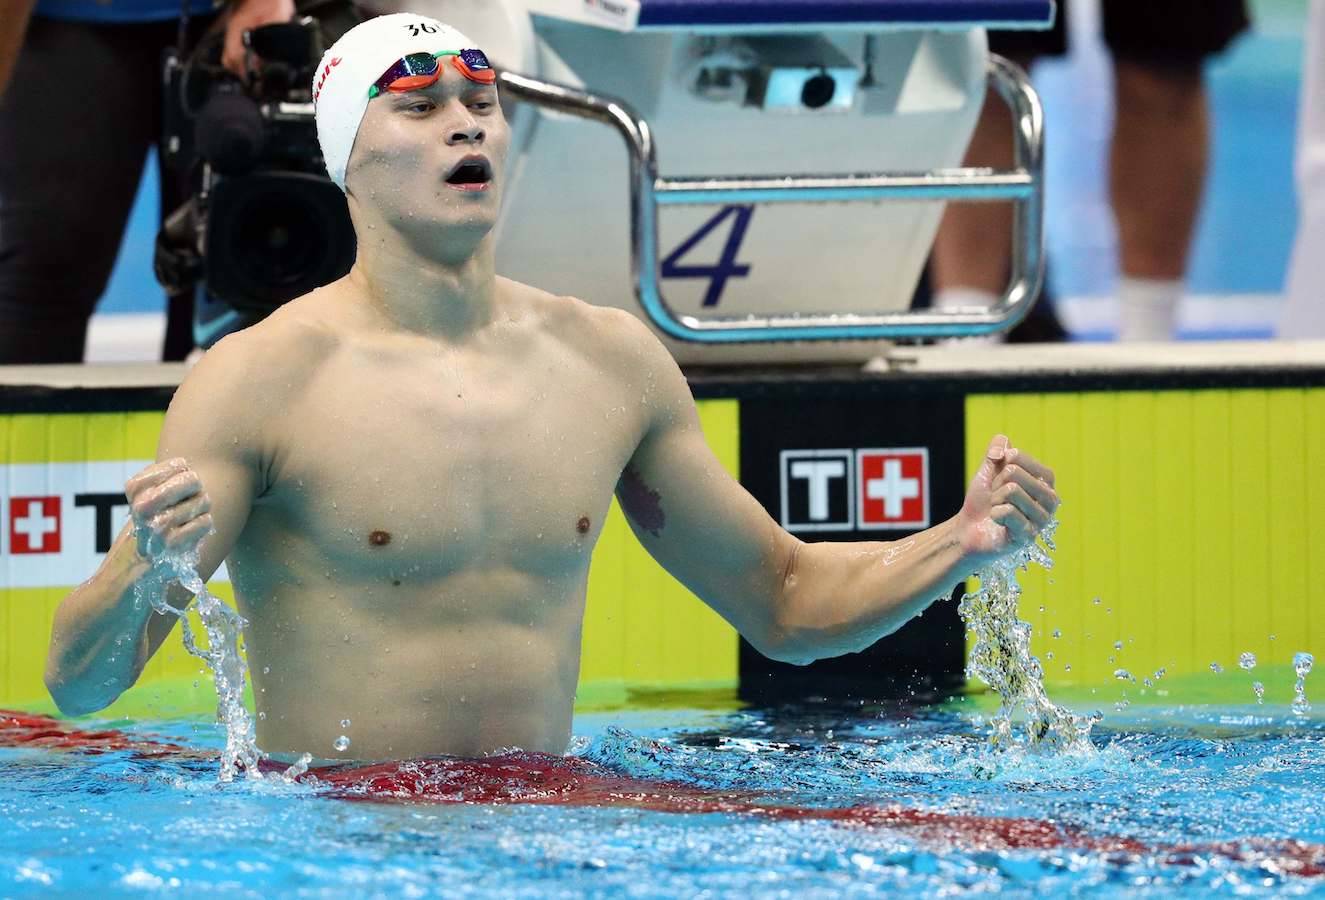 Asian Games 2018: Sun Yang gets gold for China ( men's 200m freestyle)